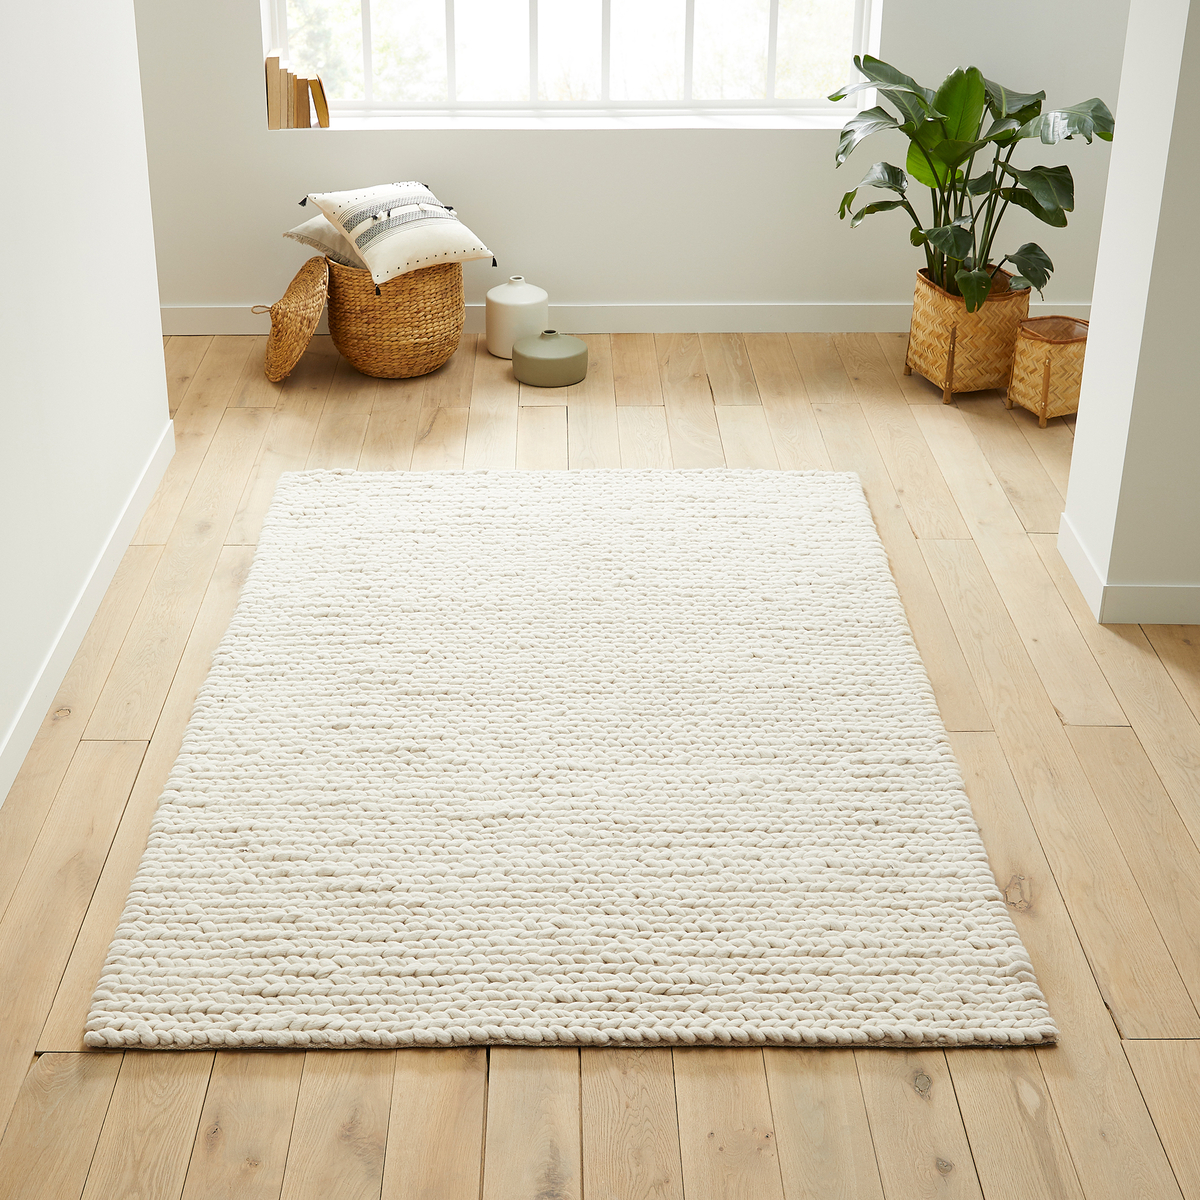 Tapis pure laine, Diano, effet tricot